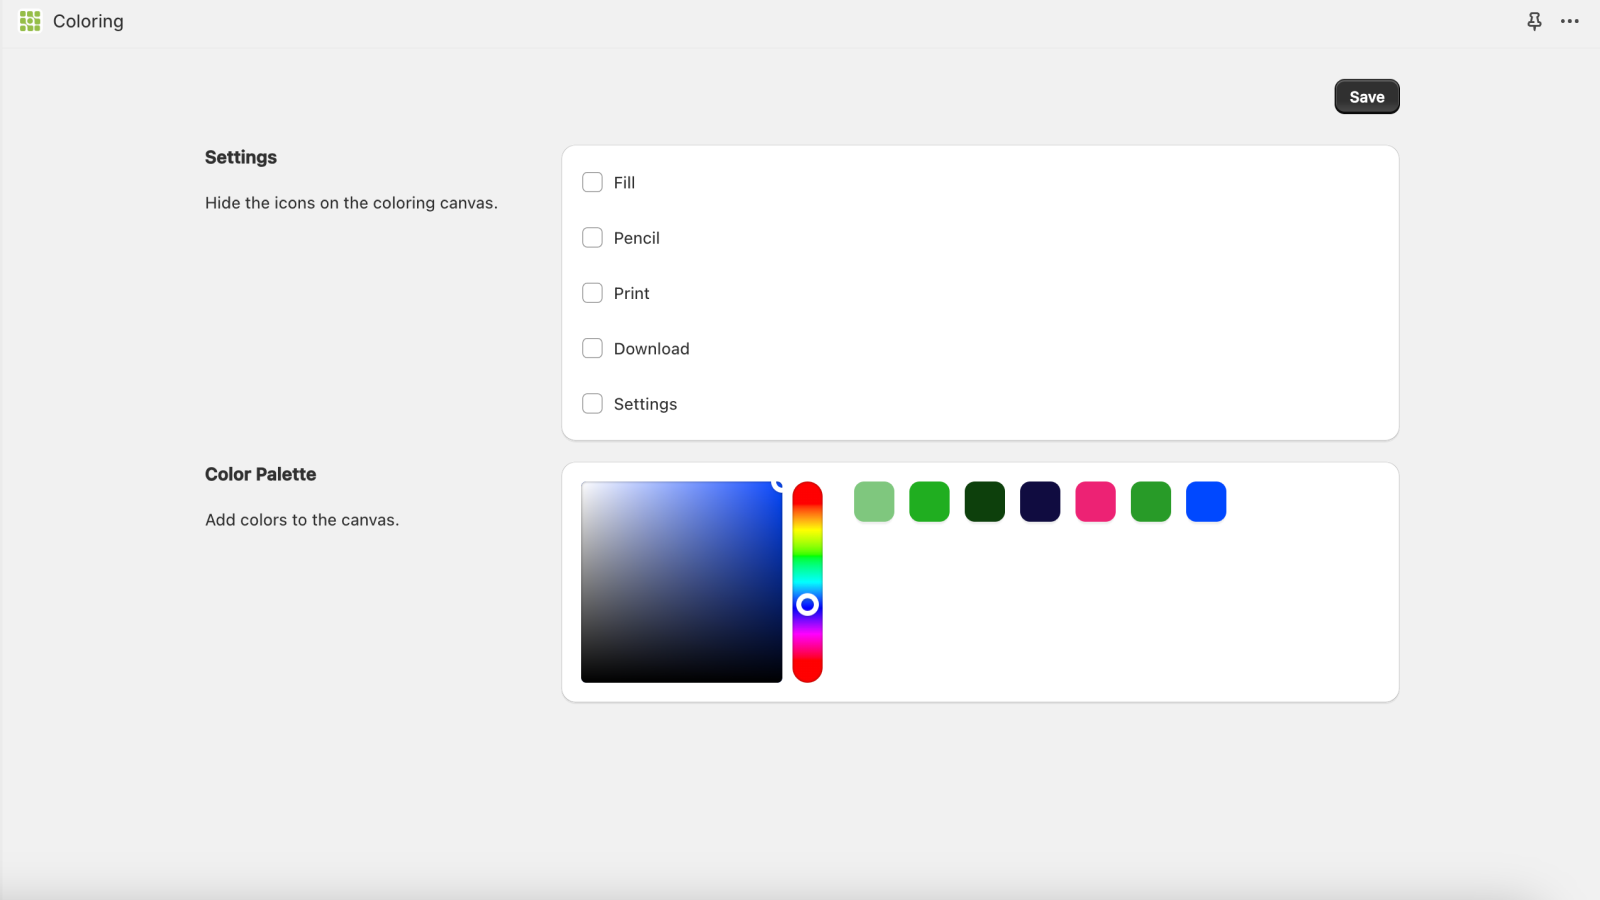 Configurable actions and color palette